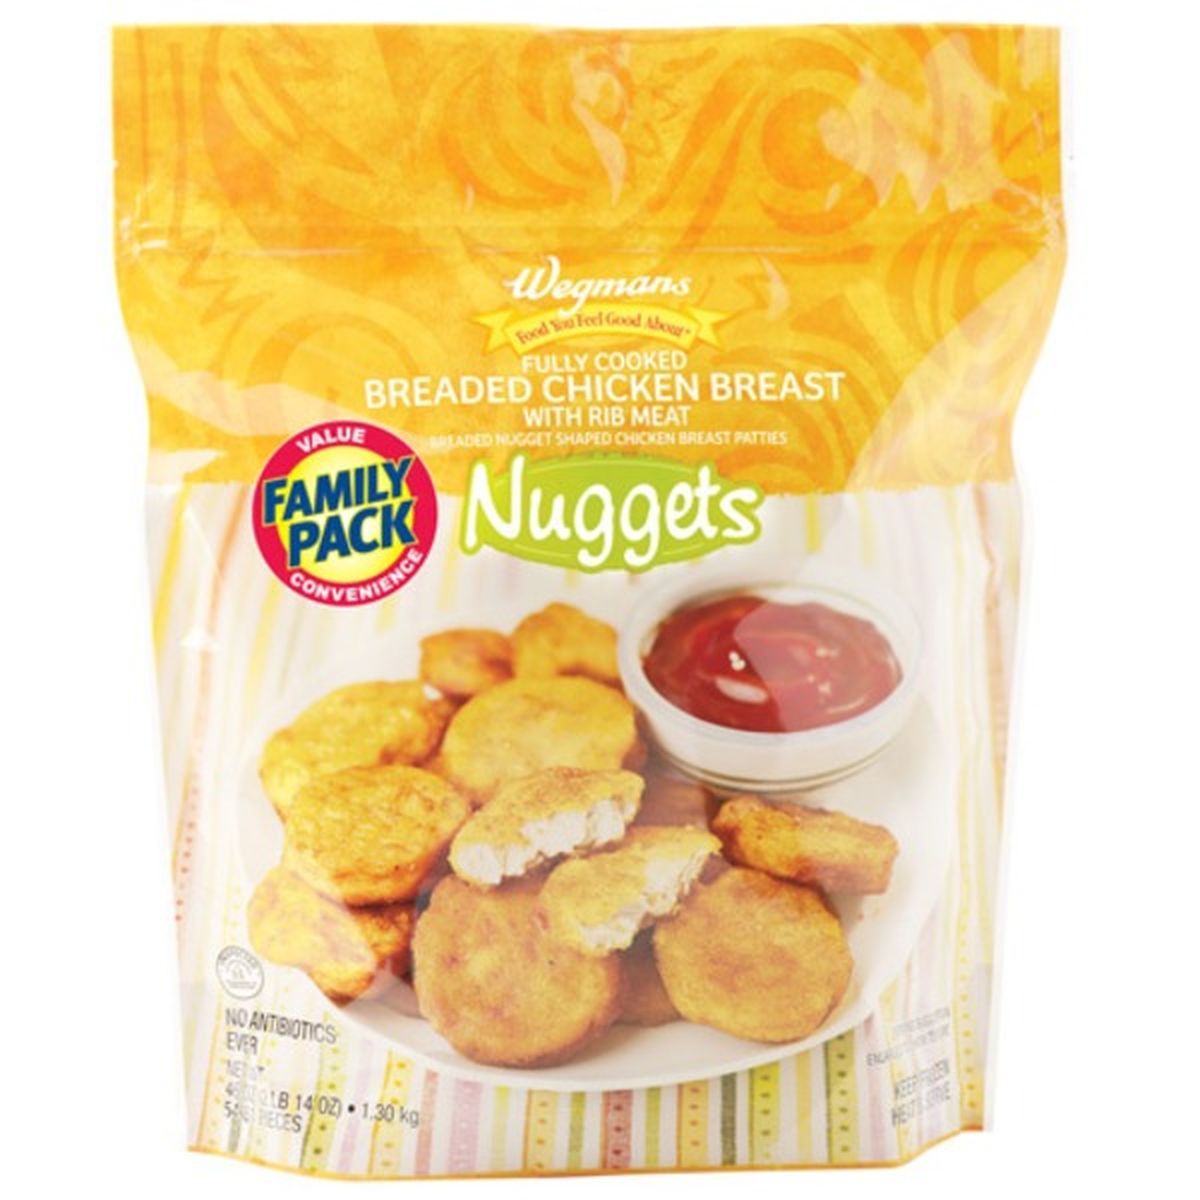 Calories in Wegmans Frozen Fully Cooked Chicken Breast Nuggets, FAMILY PACK